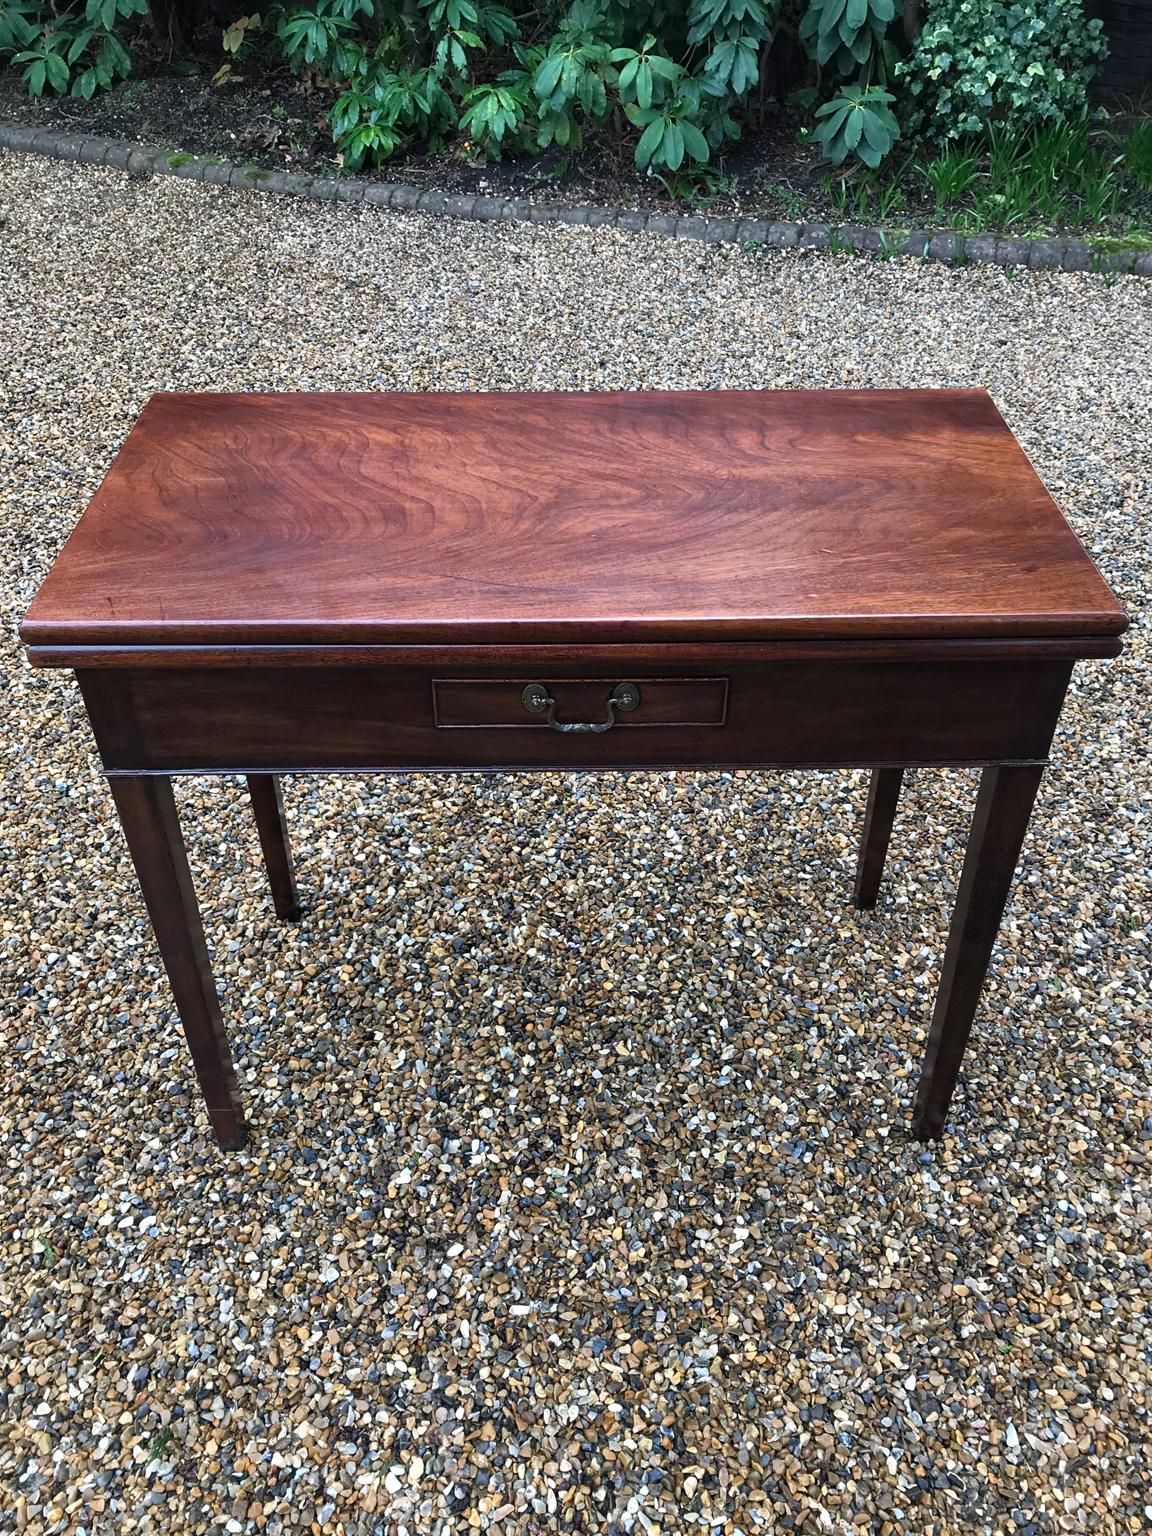 18th century mahogany fold-over tea table with a small single drawer,

circa 1790.

Dimensions:
Height 29 inches – 74 cms
Width 26.5 inches – 67 cms
Depth 17 inches – 43 cms.

 